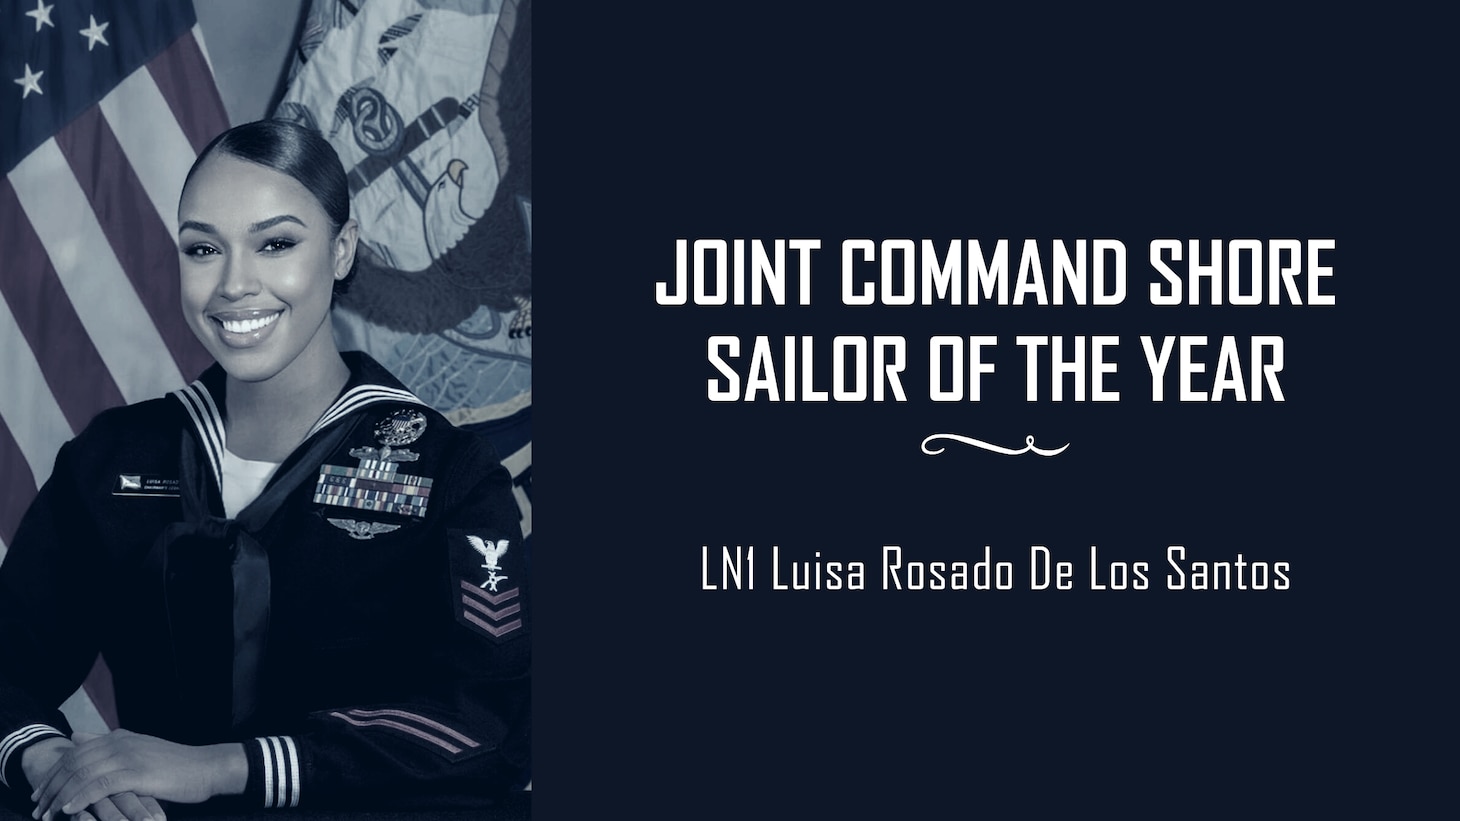 Joint Command Shore Sailor of the Year